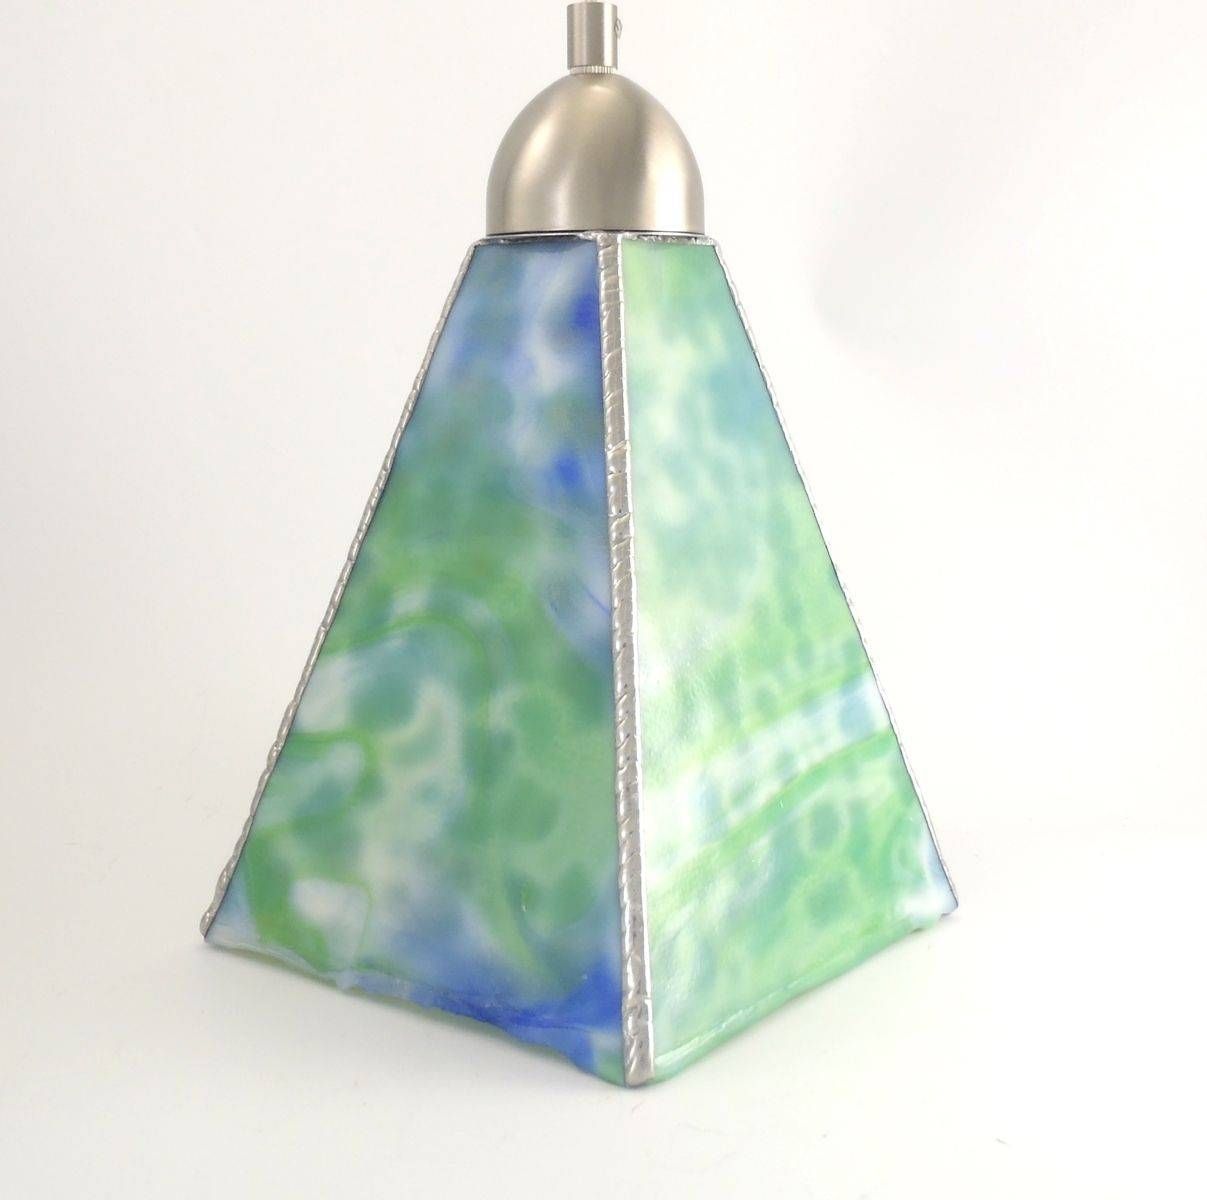 Hand Crafted Stained Glass Pendant Light 'wisteria' Handmade Pertaining To Handmade Glass Pendant Lights (View 9 of 15)